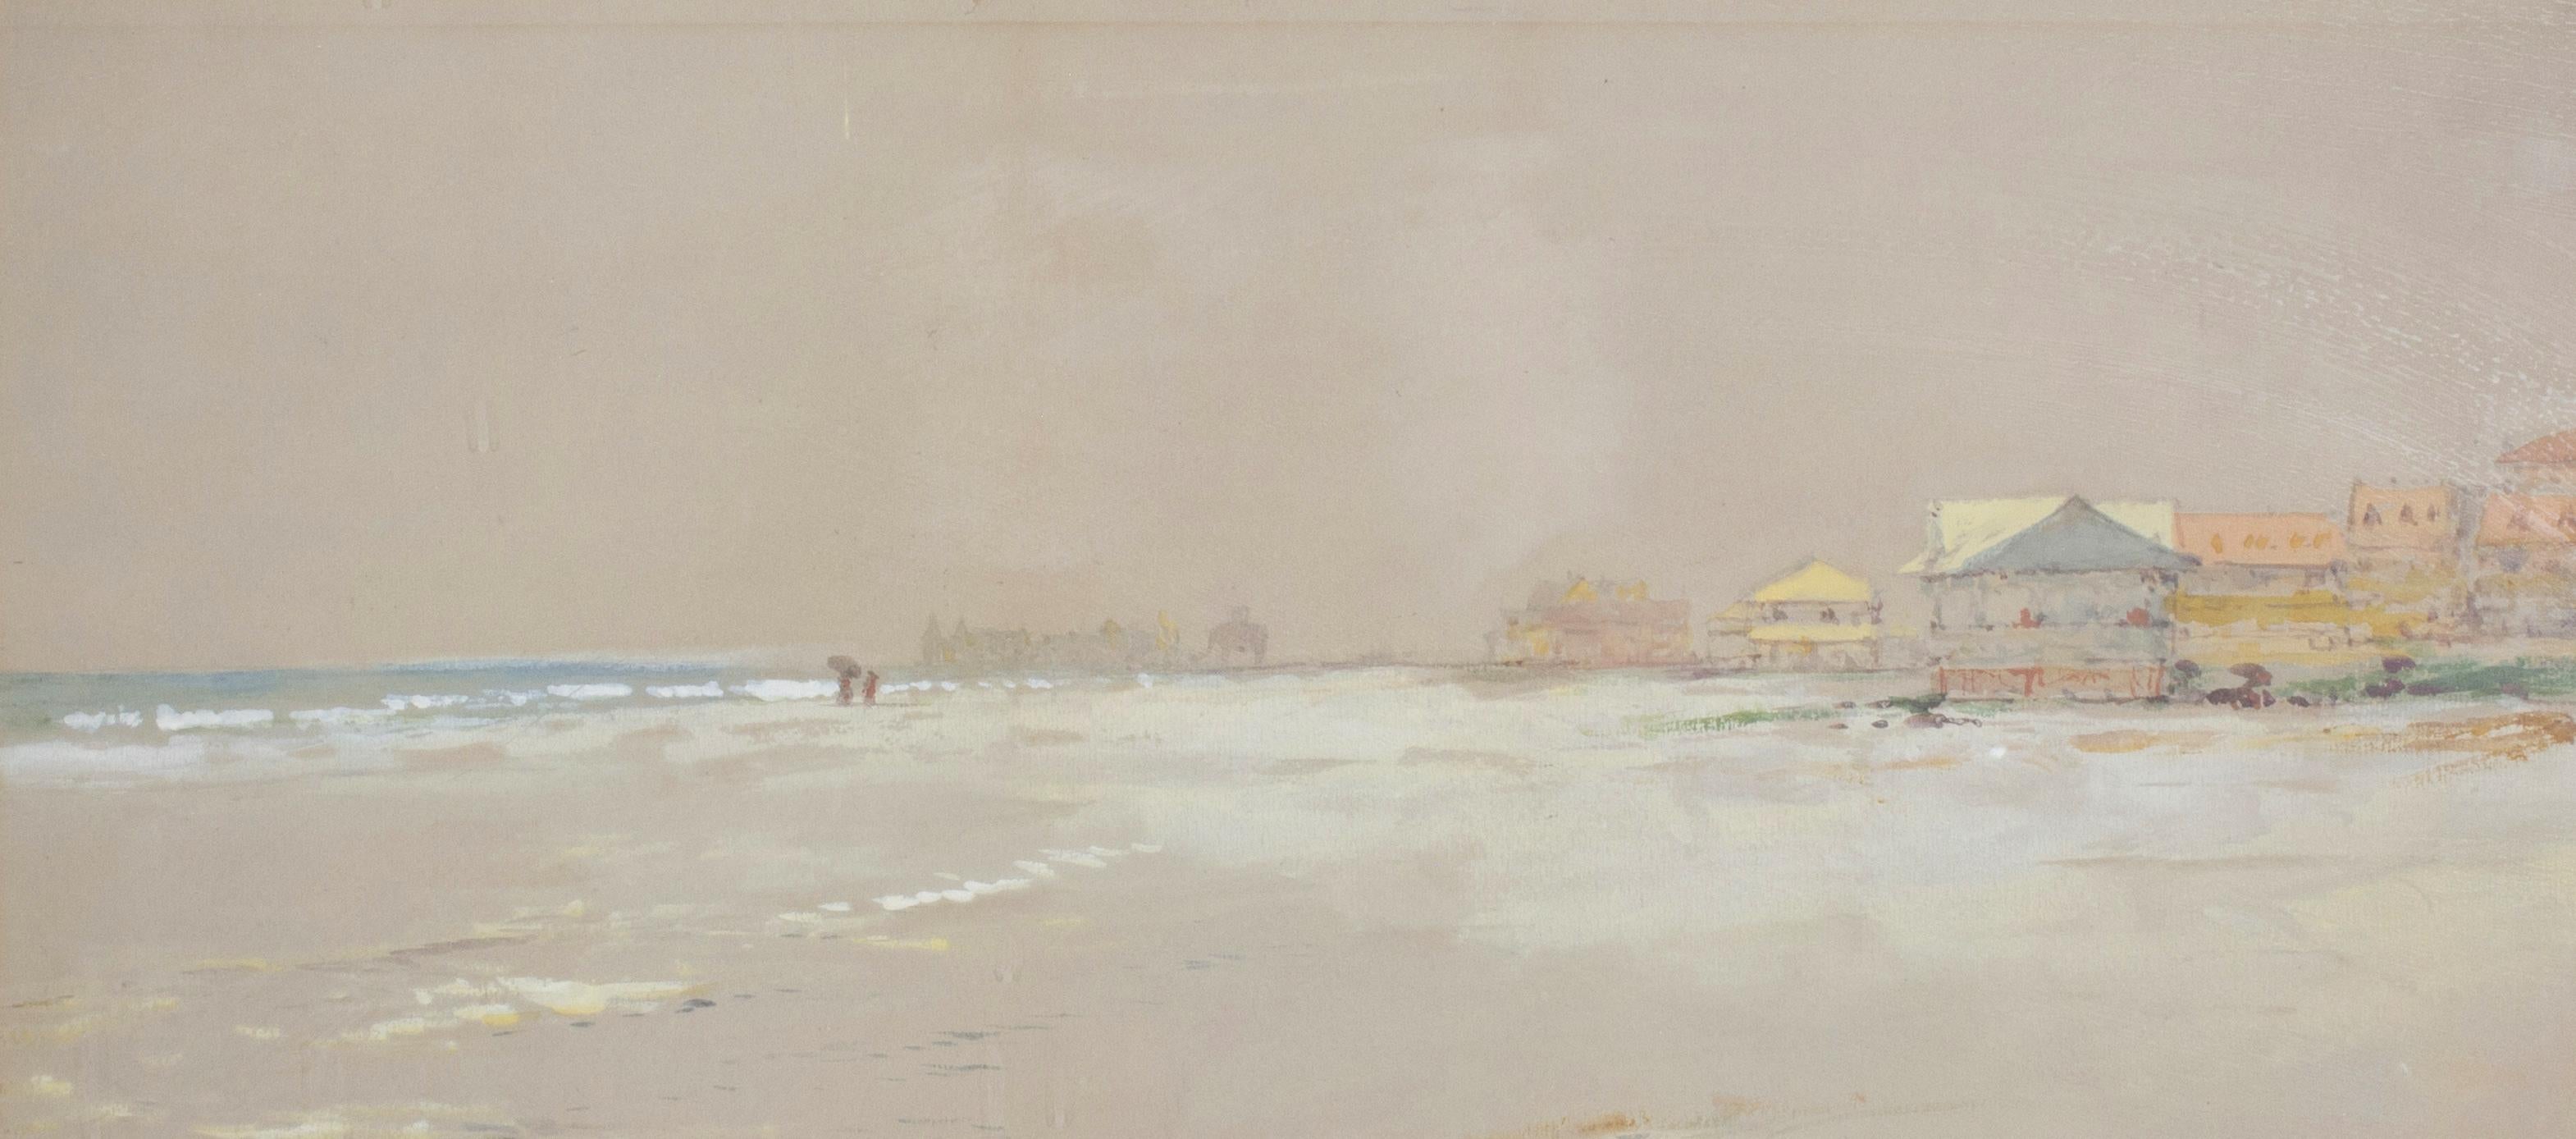 Watercolor of Atlantic City Beach with Lucy the Elephant By E.D. Lewis - Art by Edmund Darch Lewis